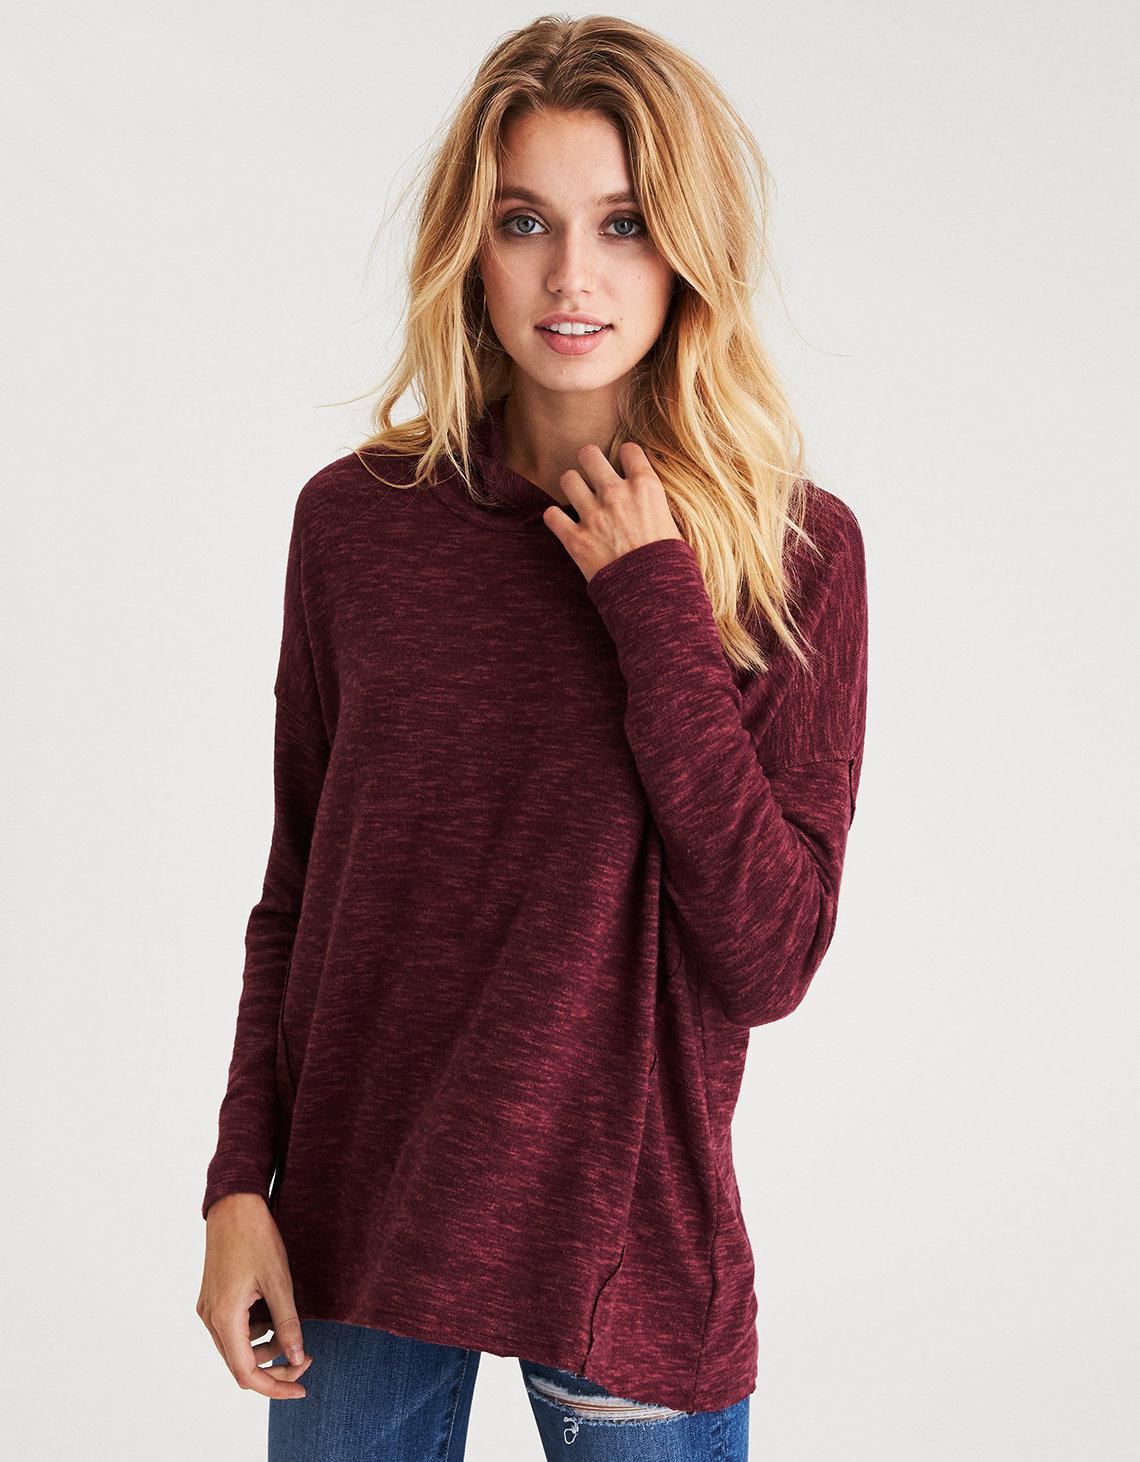 Lyst - American Eagle Ae Soft & Sexy Plush Slouchy Hoodie in Red